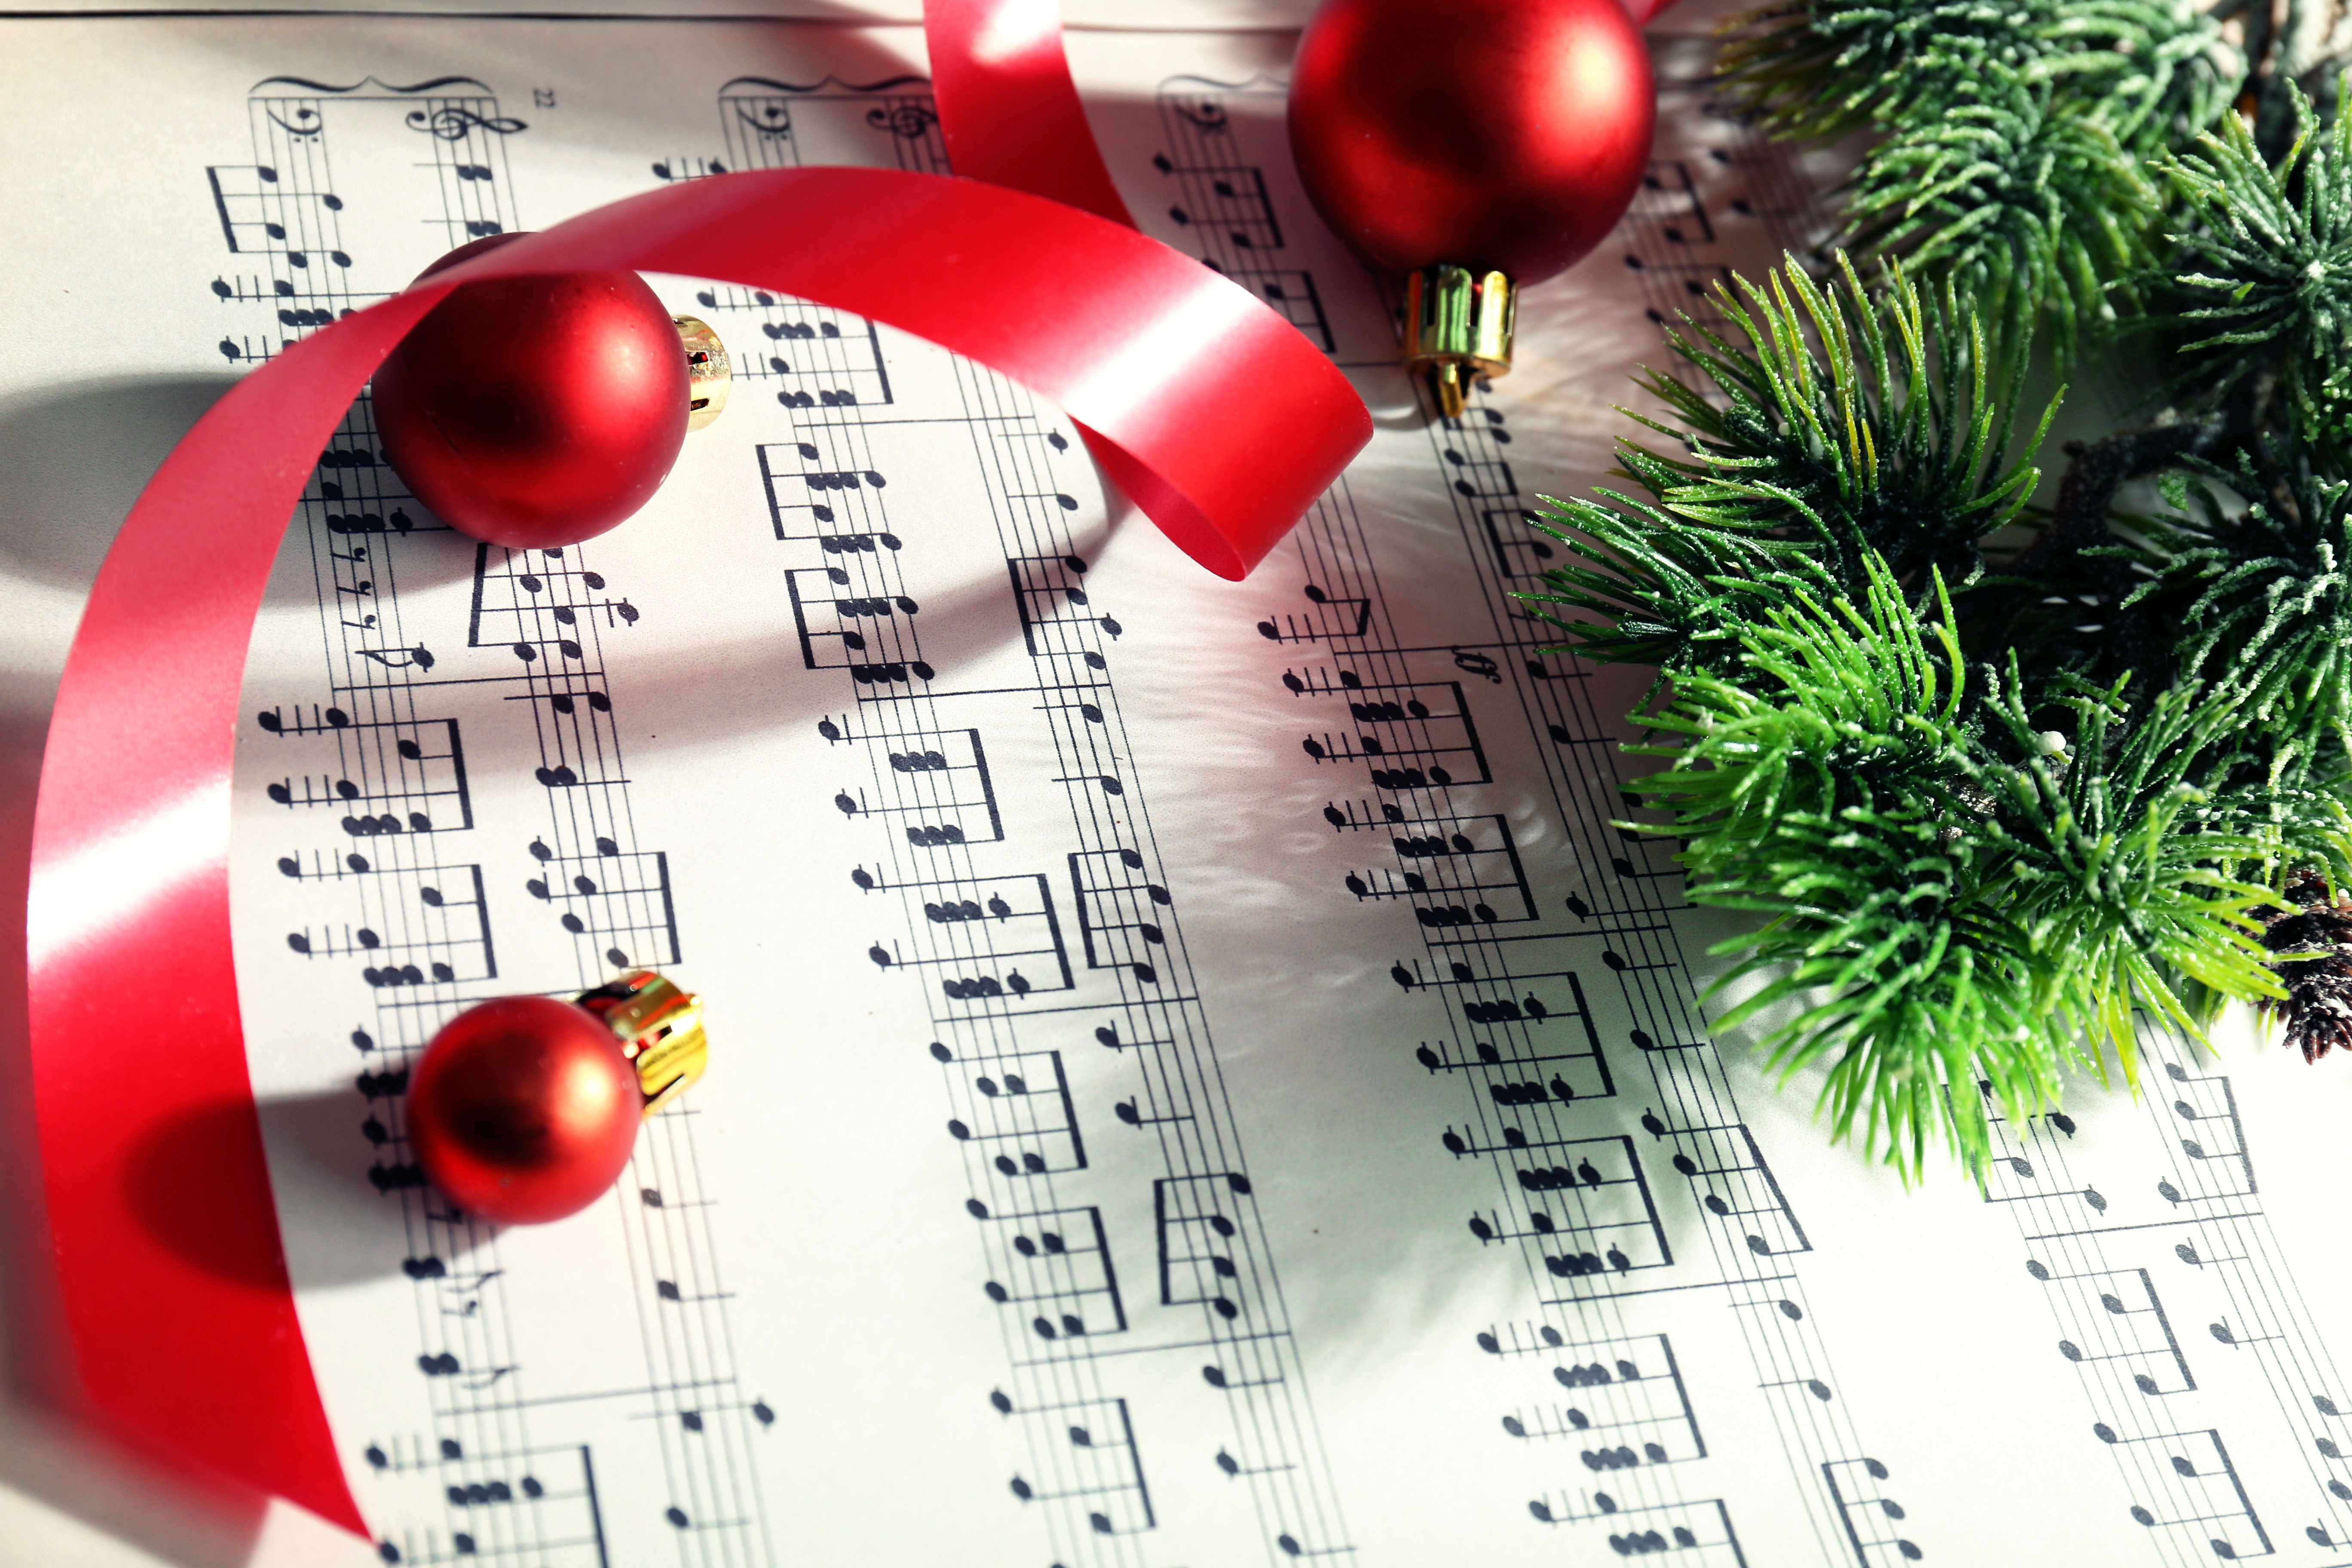 sheet music with holiday ornaments, ribbons and evergreen branches